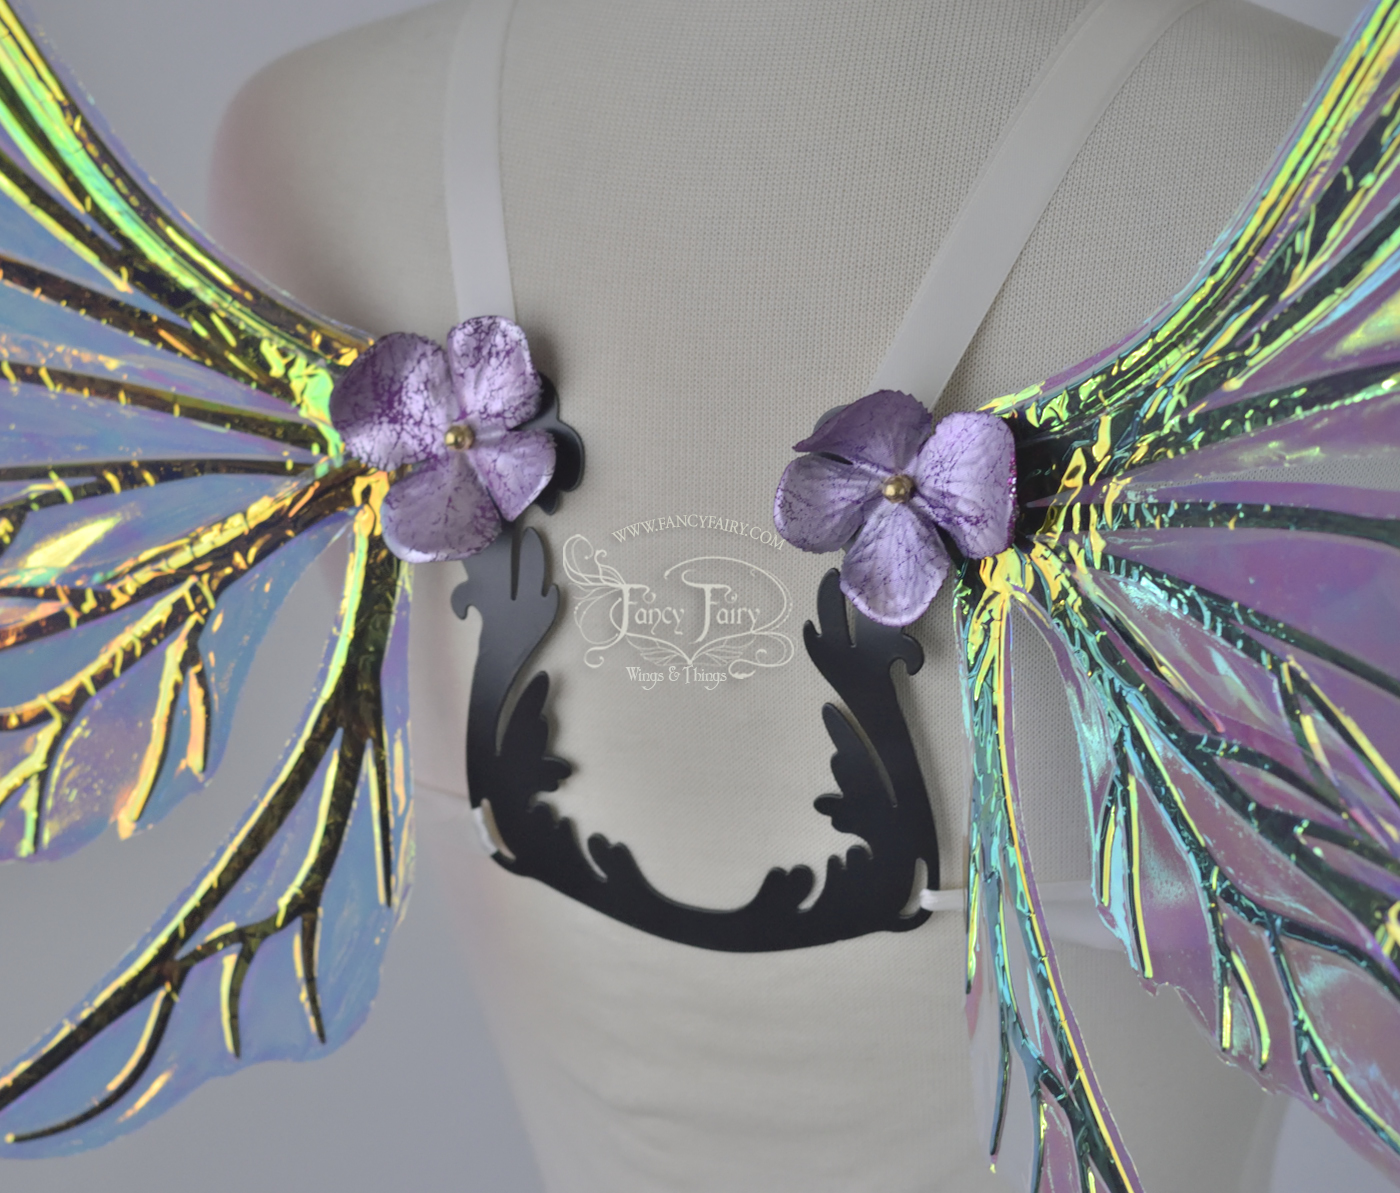 Ellette Iridescent Fairy Wings in Patina Green with Copper veins